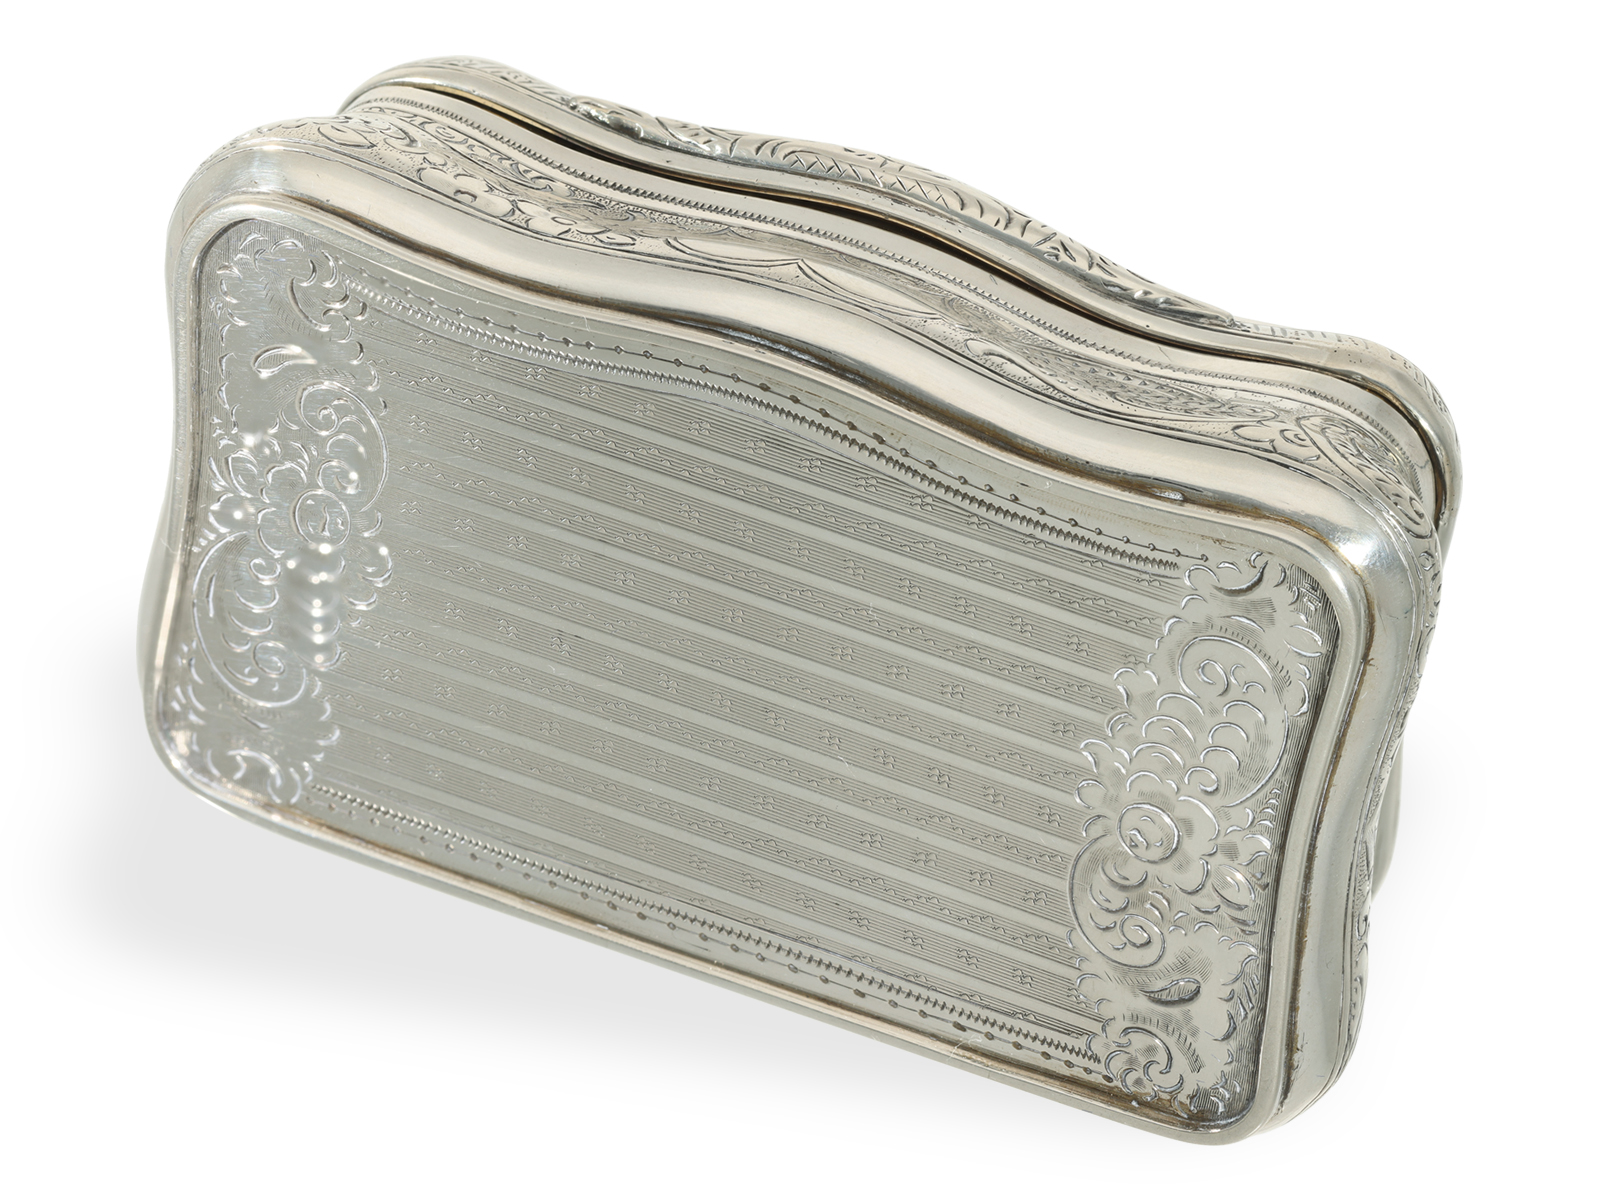 Snuff box: very fine box from around 1815 from an officer's possession - Image 4 of 5